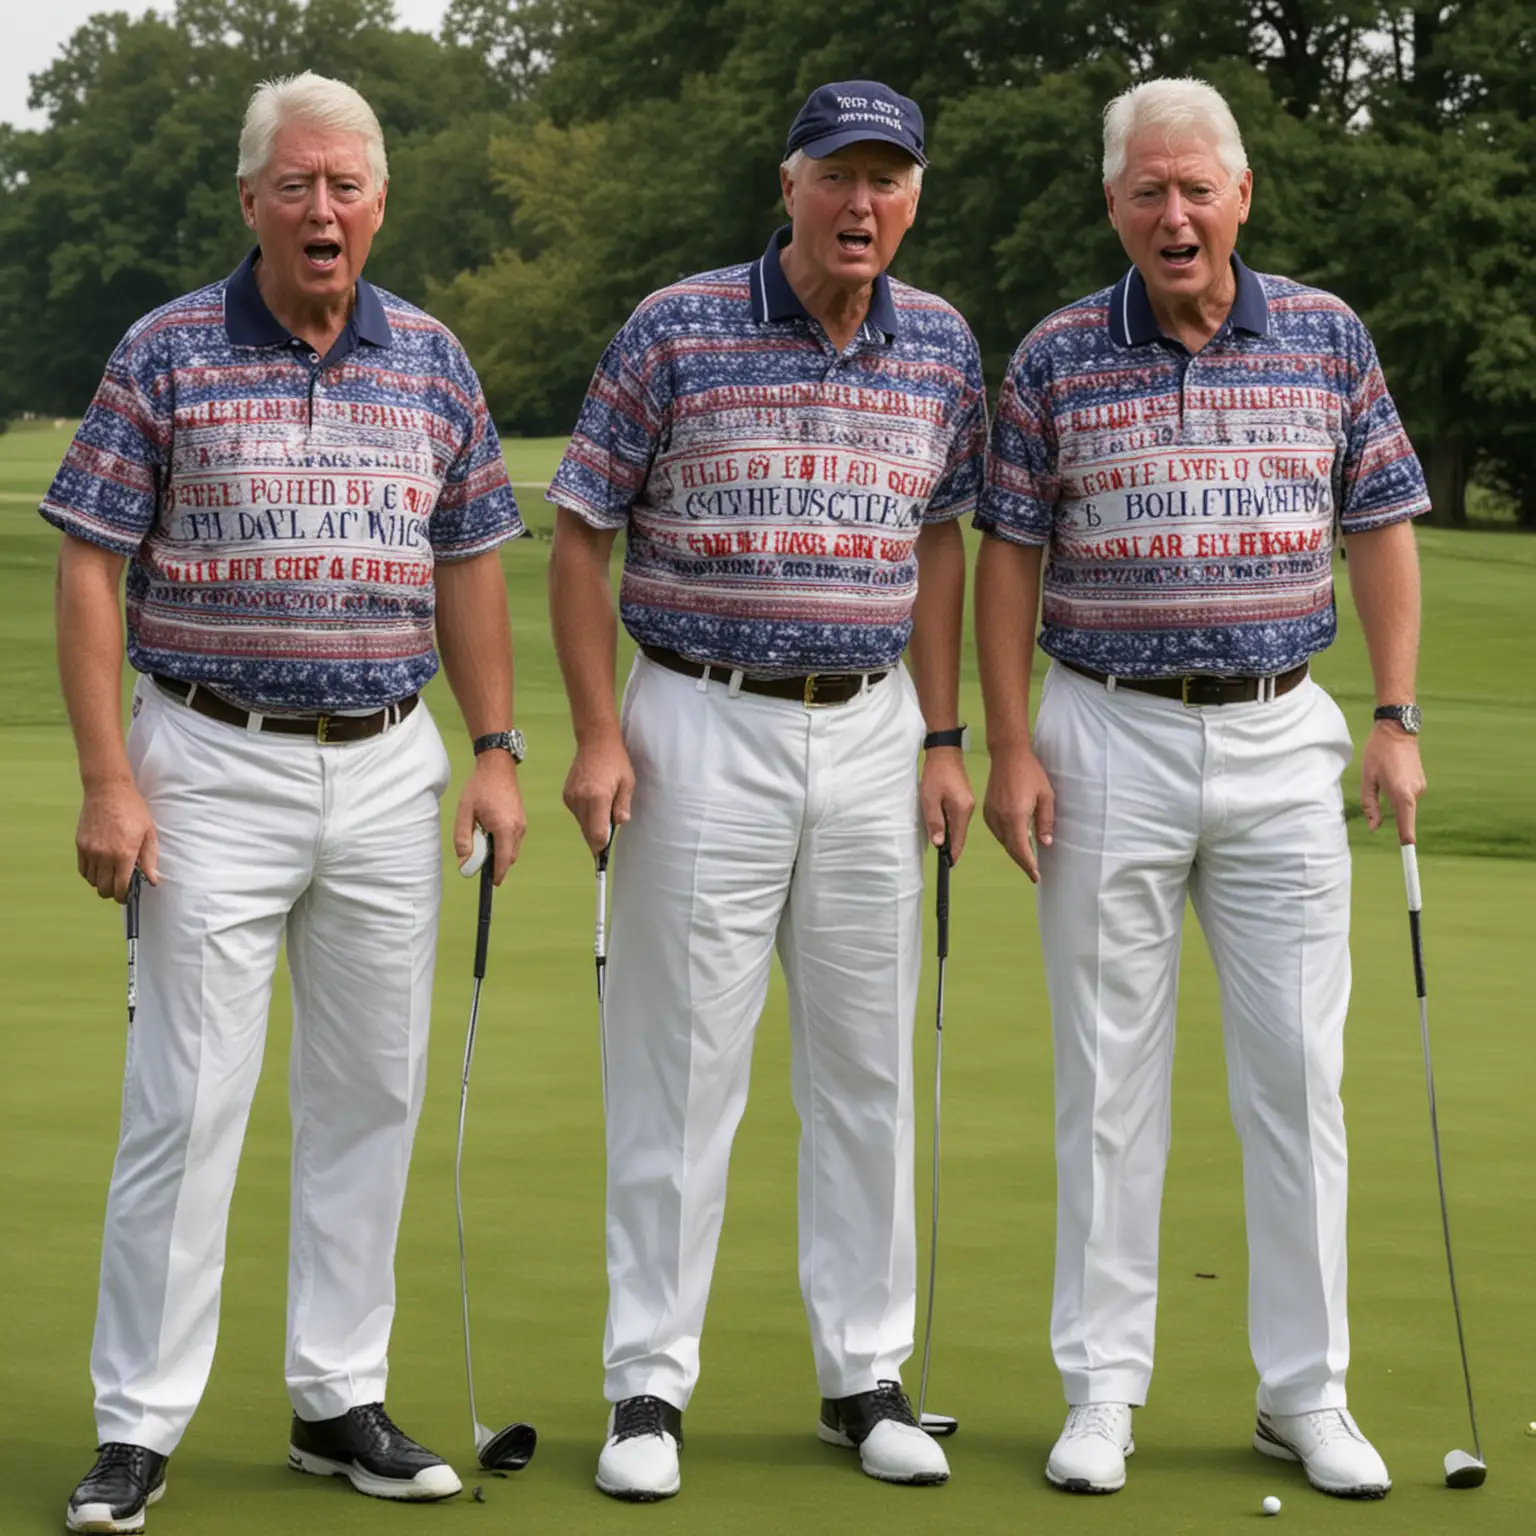 Donlad Trump, Bill Clinton and prince andrew identical twins playing golf with different shirts
